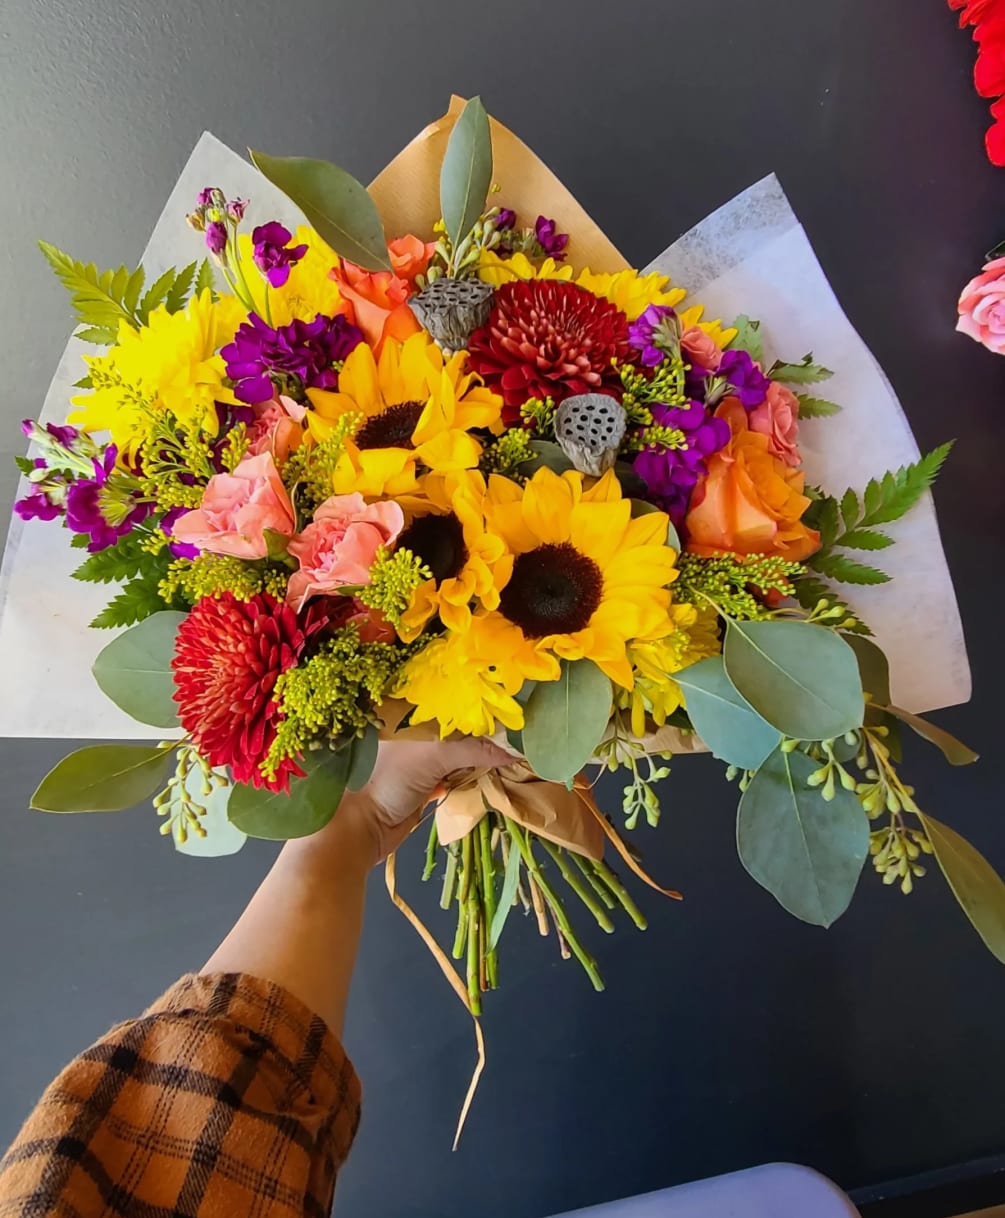 A fresh off the field fall wrap. Utilizing sunflowers, cremones, roses, and